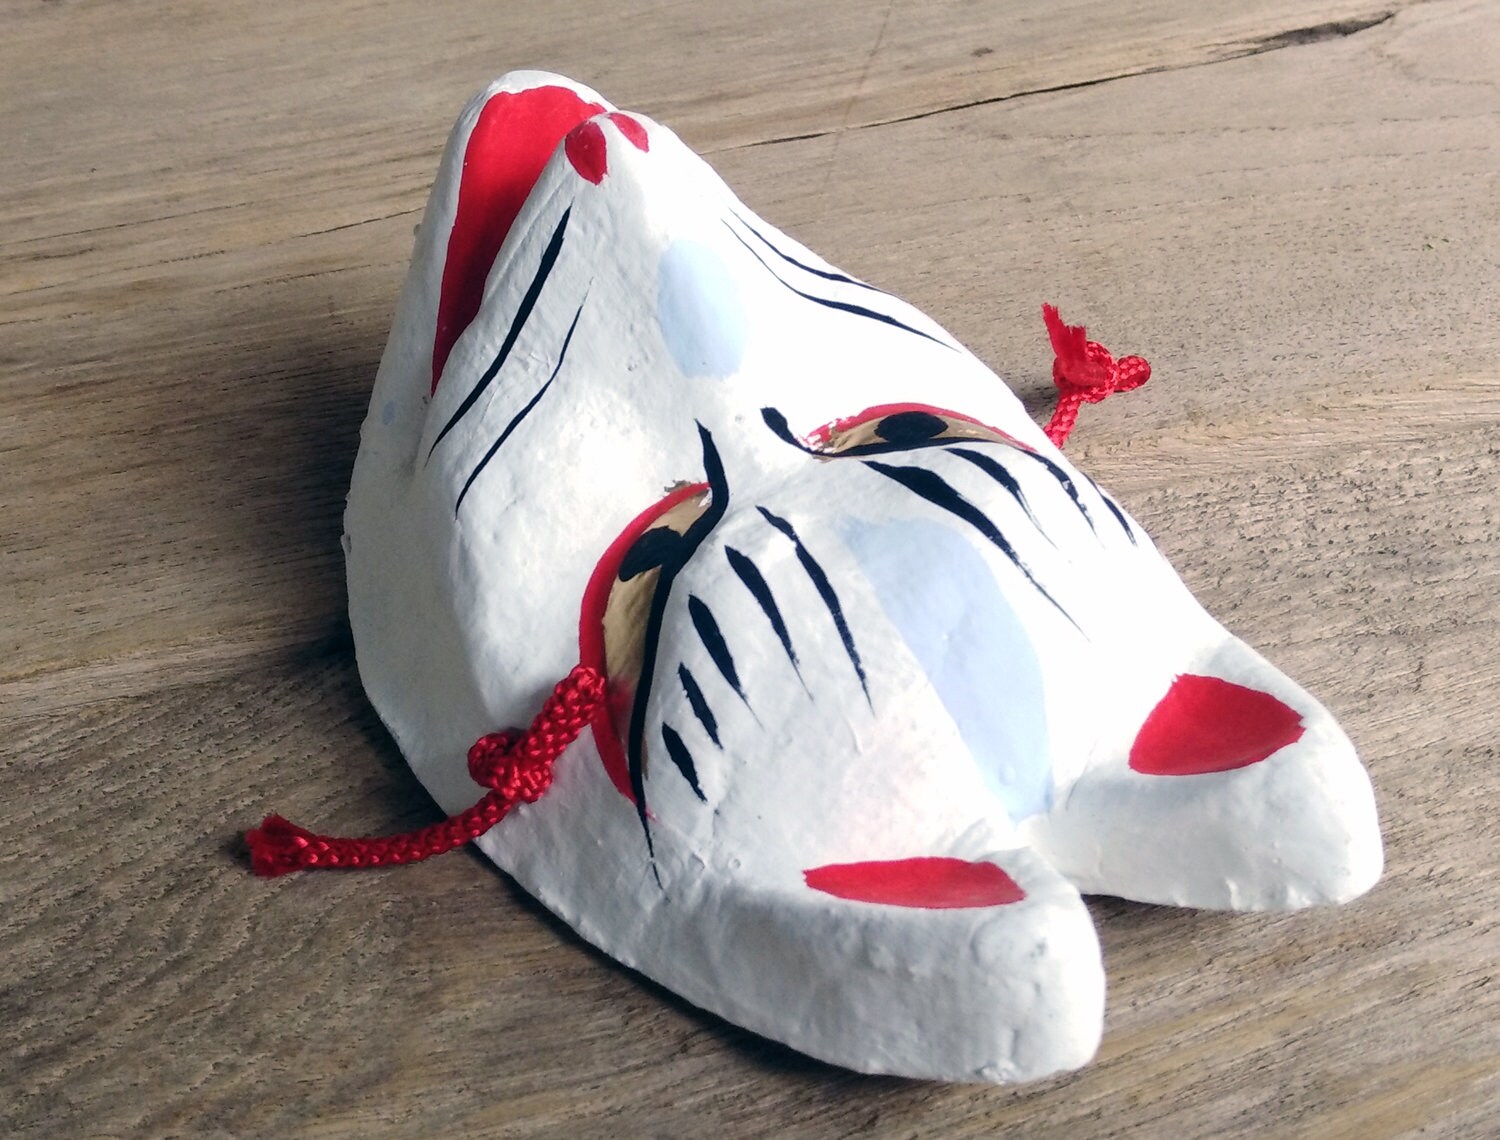 Kitsune Mask, White Fox Mask, Japanese Vintage Fox Mask, Lucky Charm, A Symbol of Magical Powers, Gods' Messengers Hight 5.5 Inches